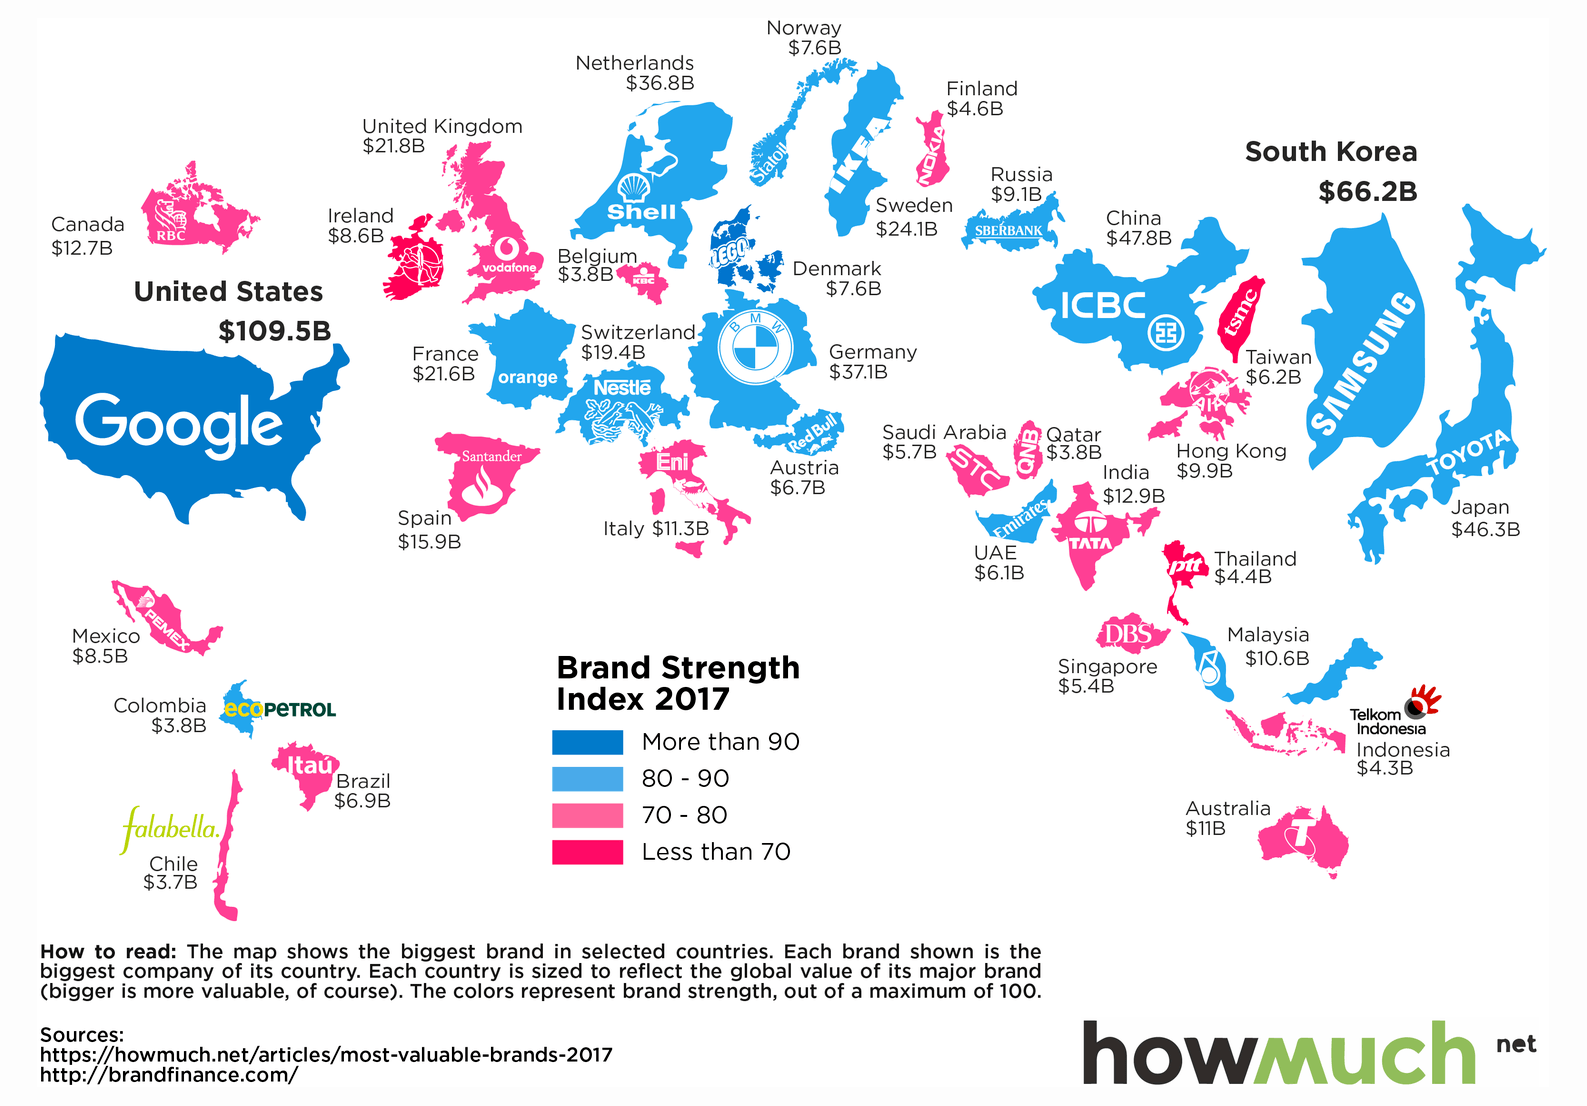 DataViz Weekly: Most Valuable Brands By Country